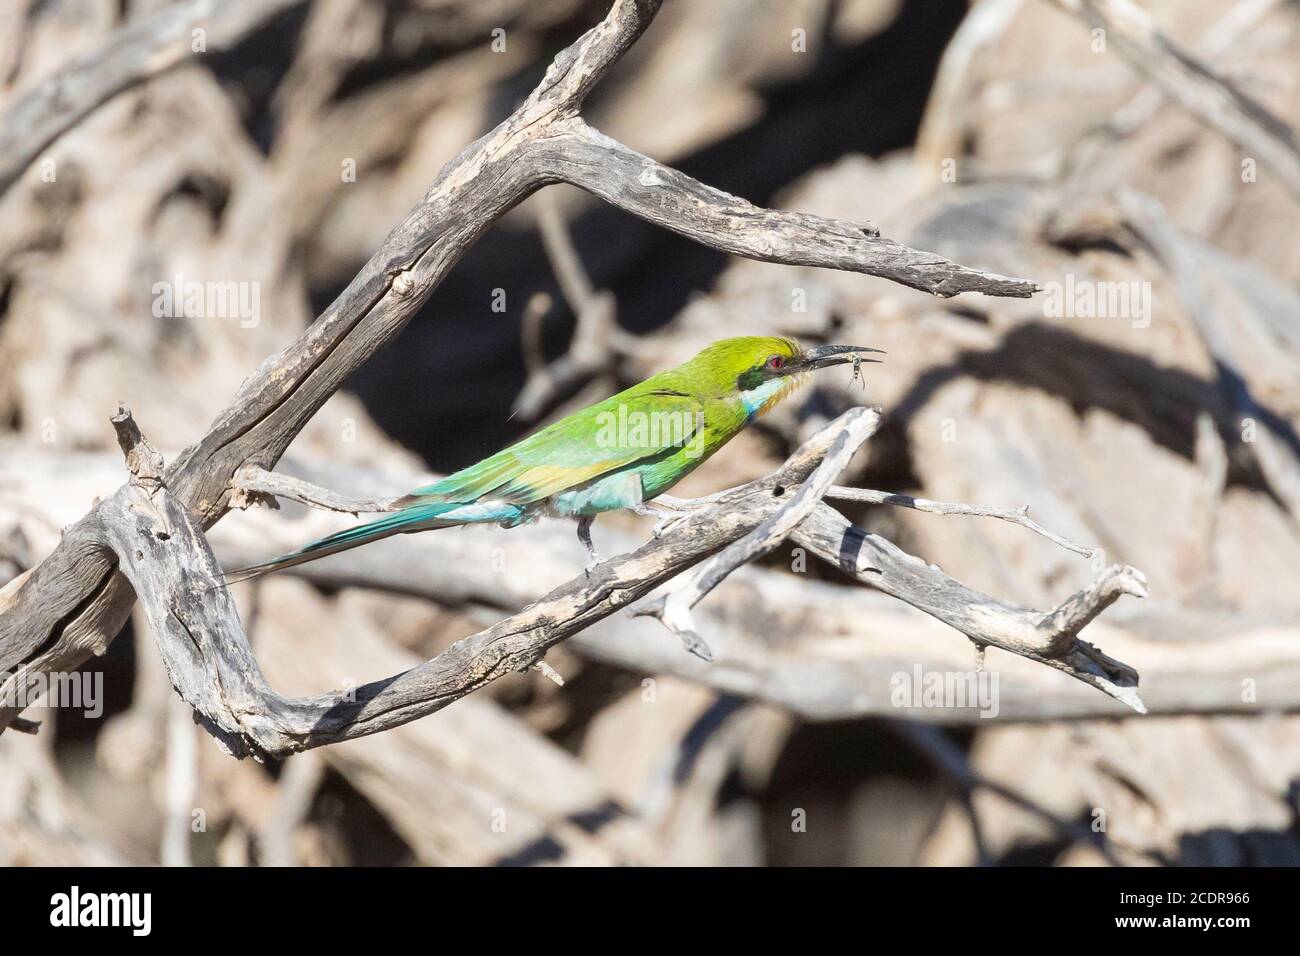 Swallow-tailed Bee-eater (Merops hirundineus) perched with insect prey in bill, Kglagadi Transfrontier Park, Kalahari, Northern Cape, South Africa Stock Photo